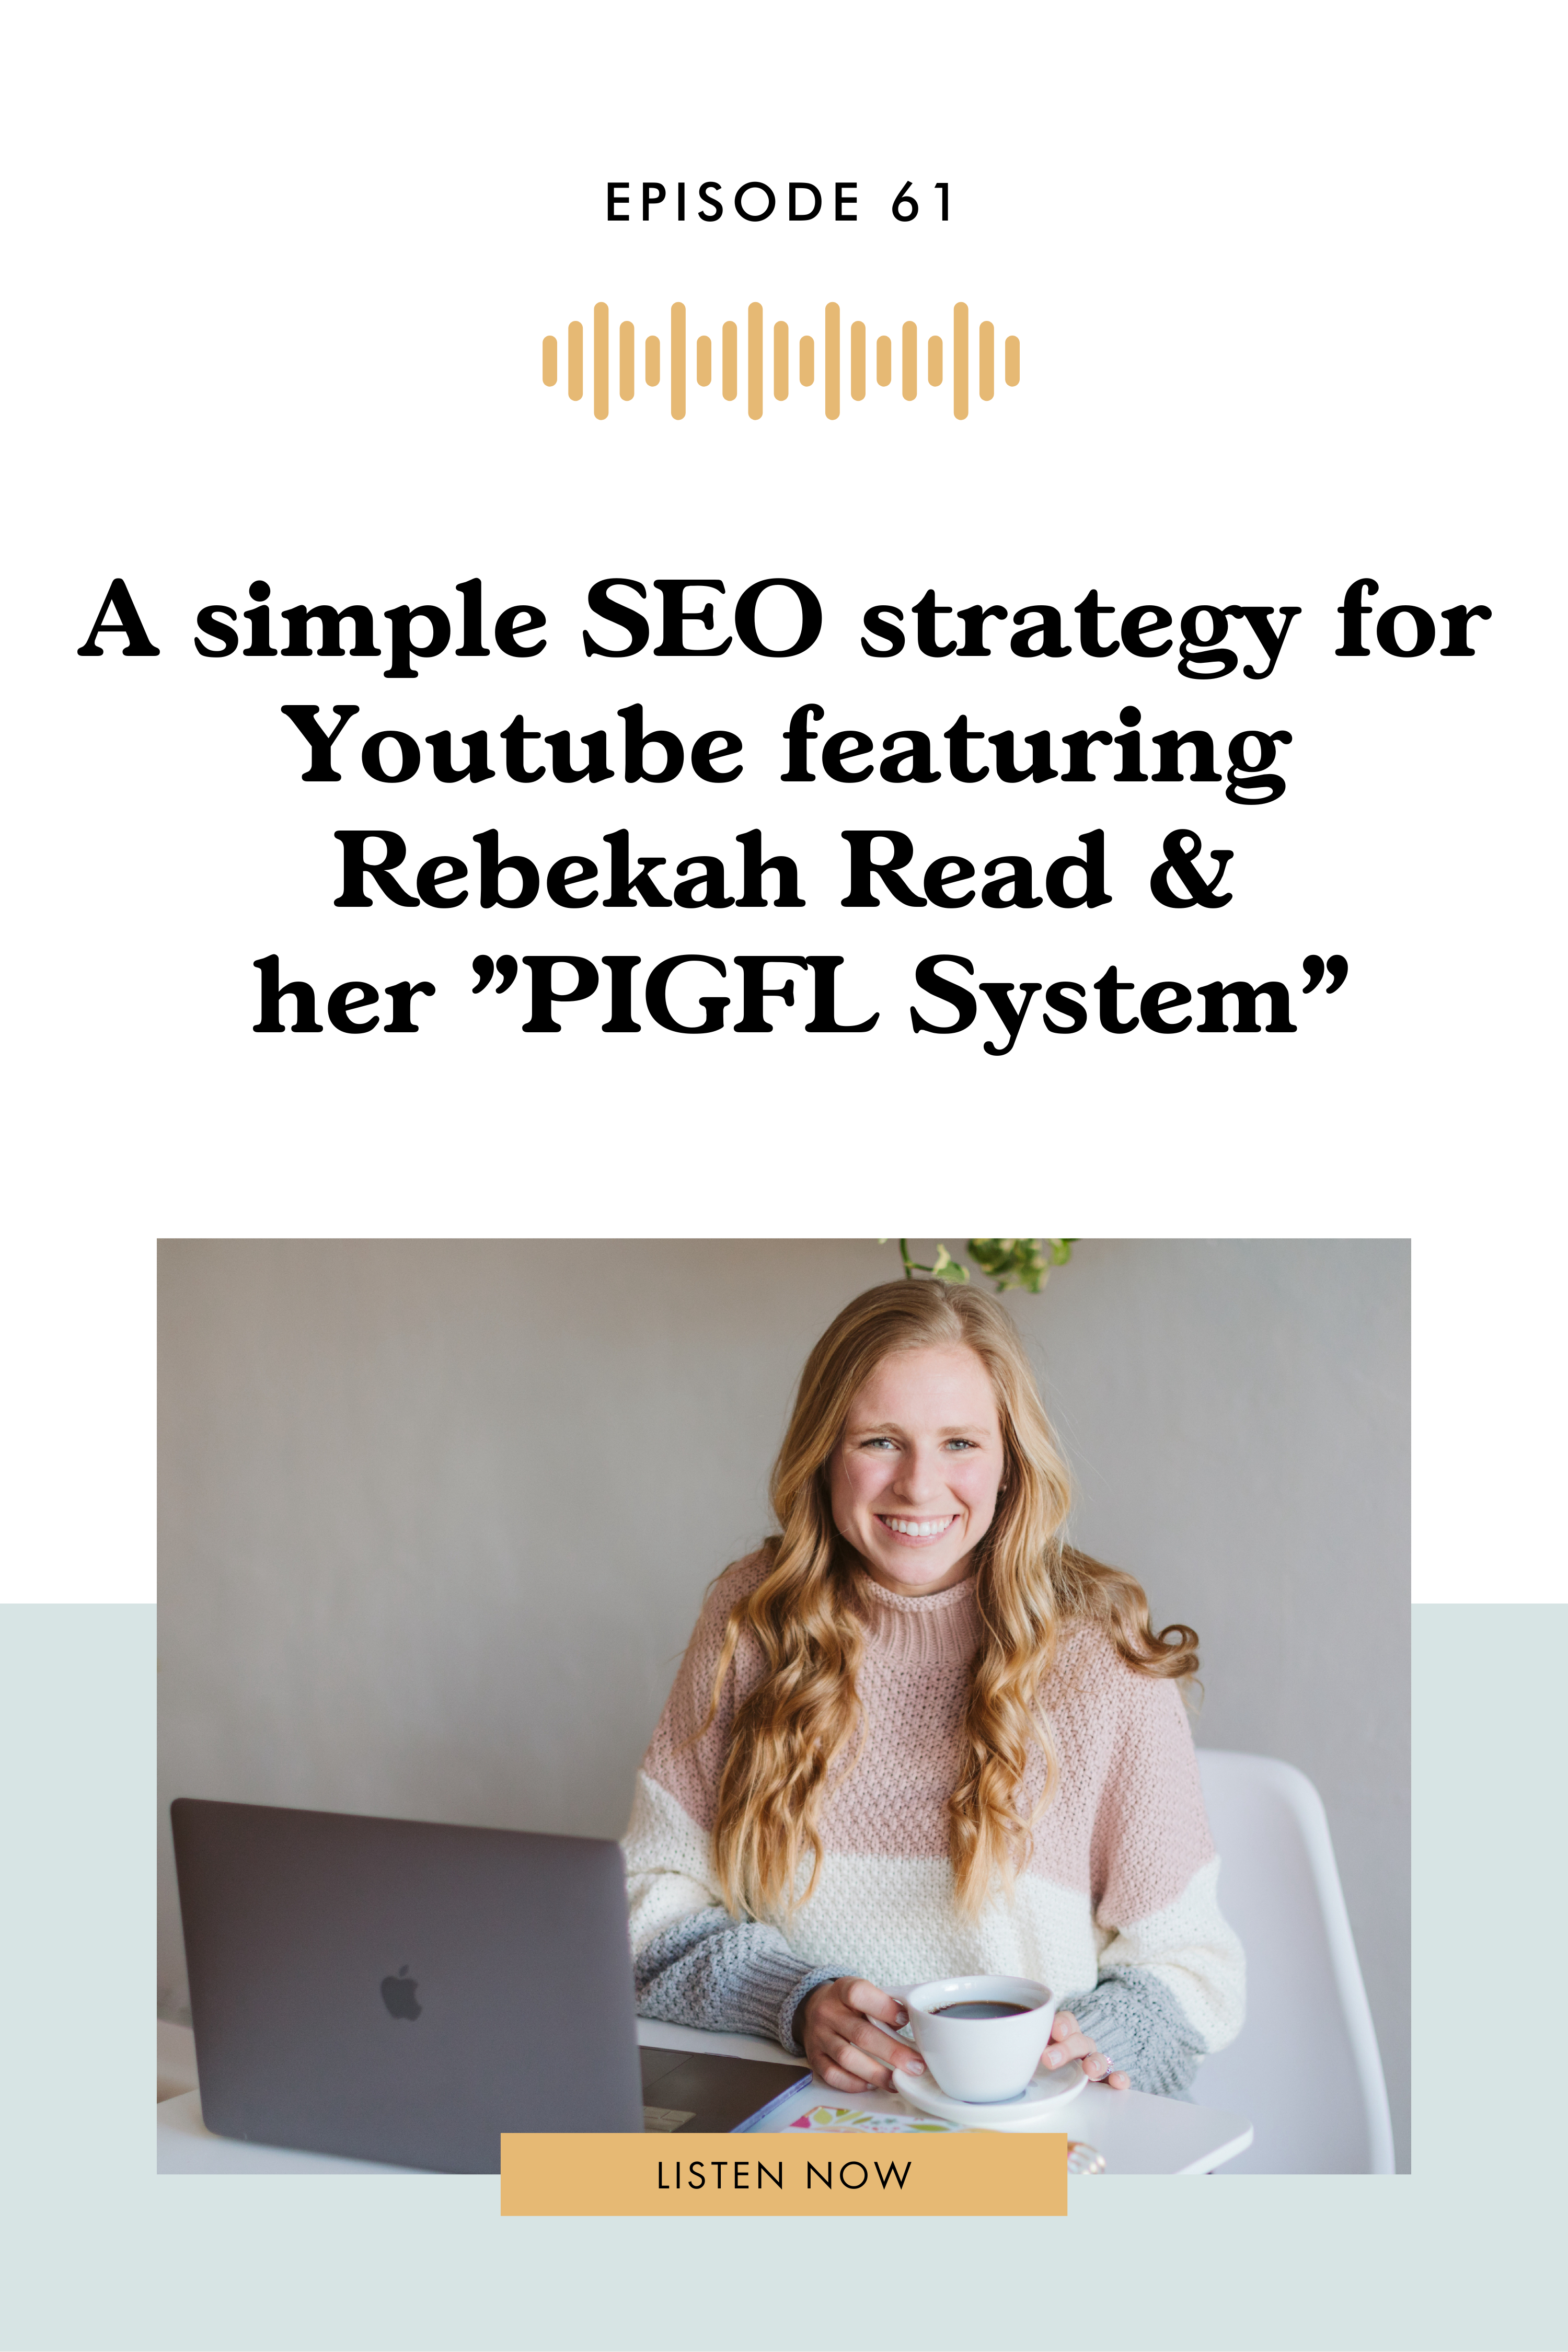 A-simple-SEO-strategy-for-Youtube-featuring-Rebekah-Read